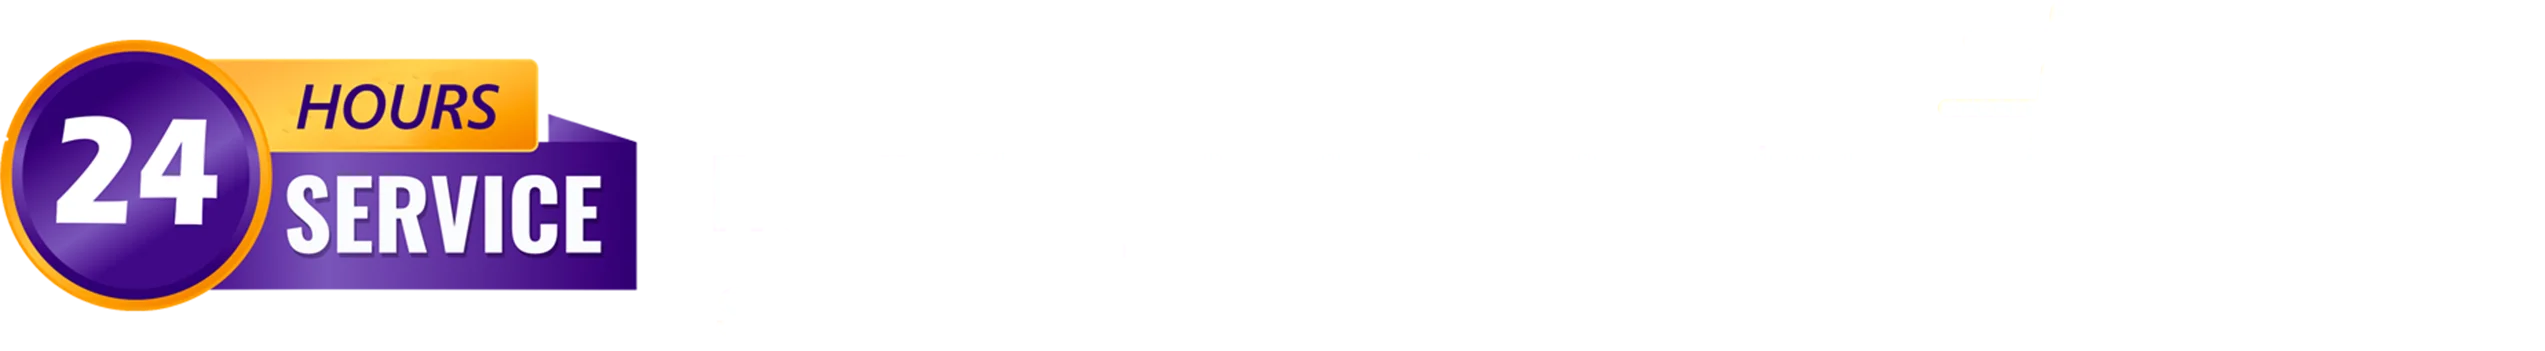 same day delivery hours large